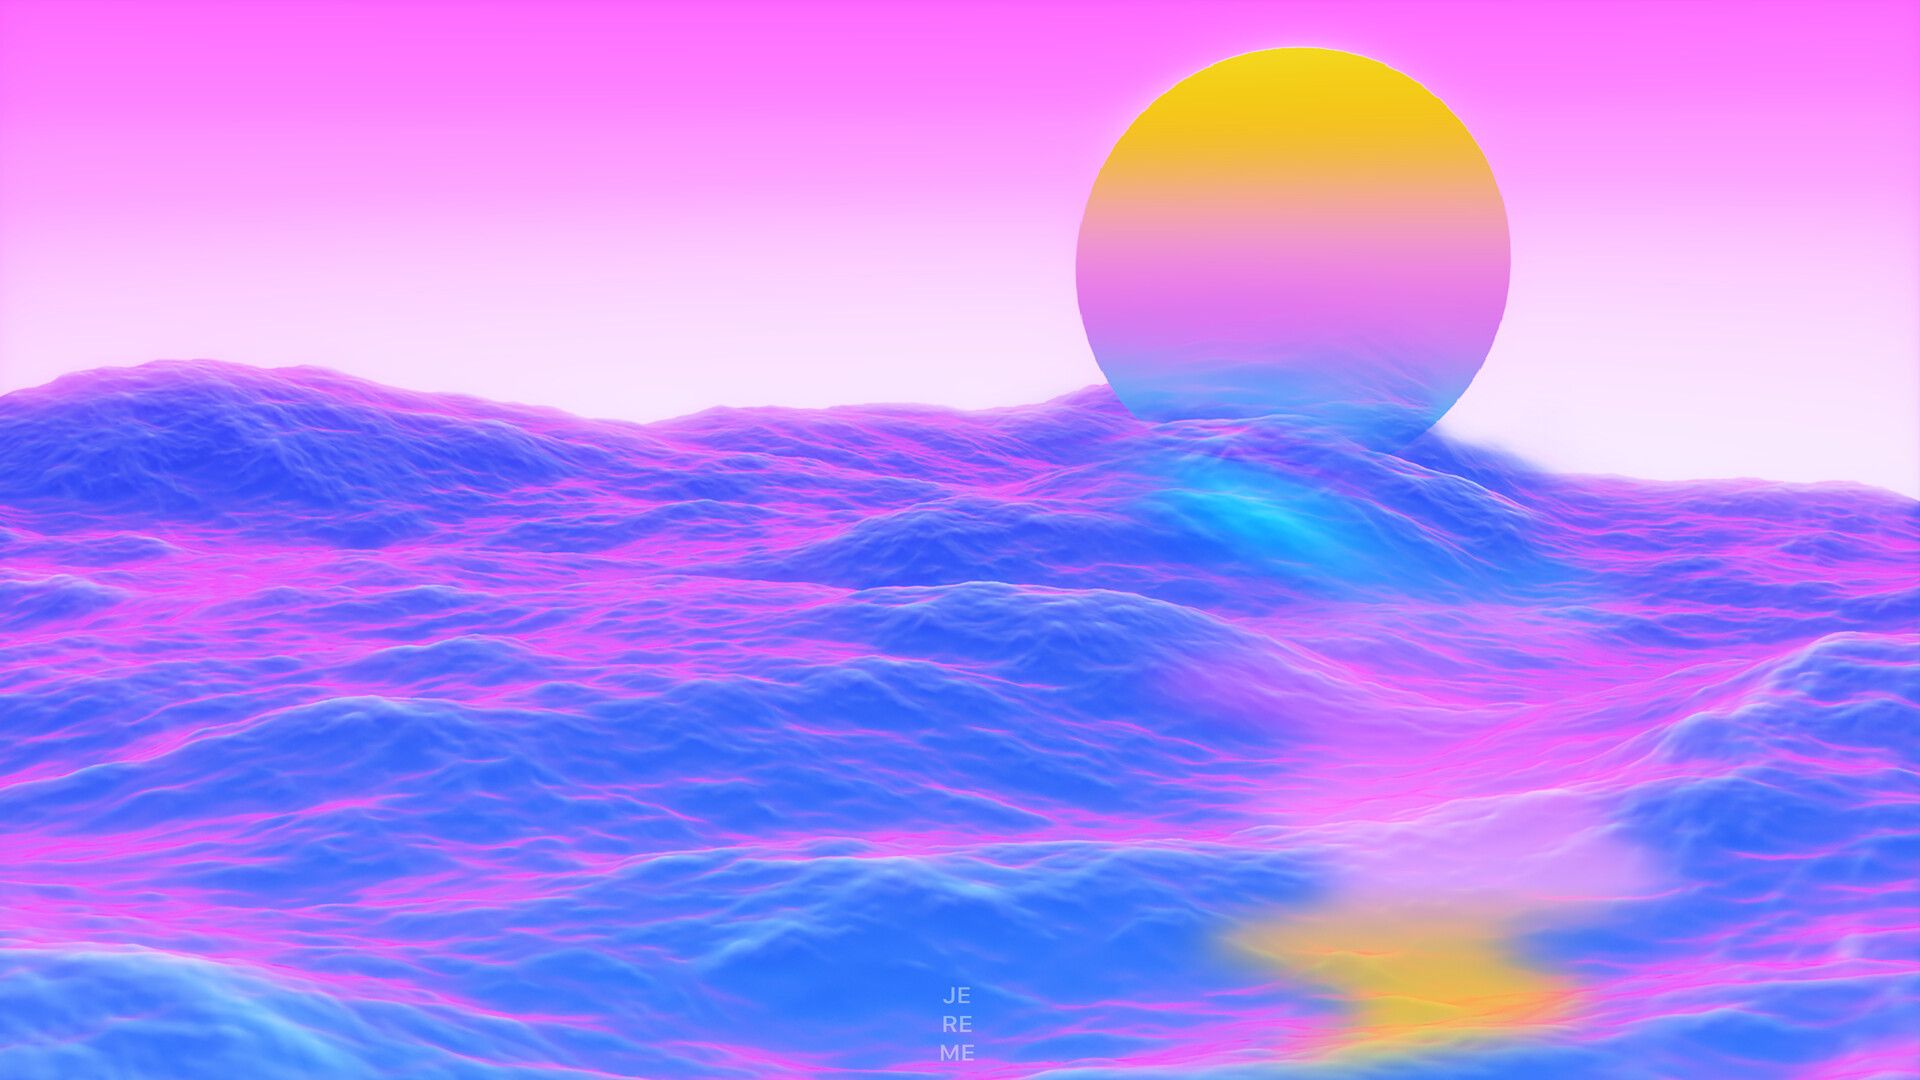 A colorful abstract landscape with a sun in the background - Lo fi